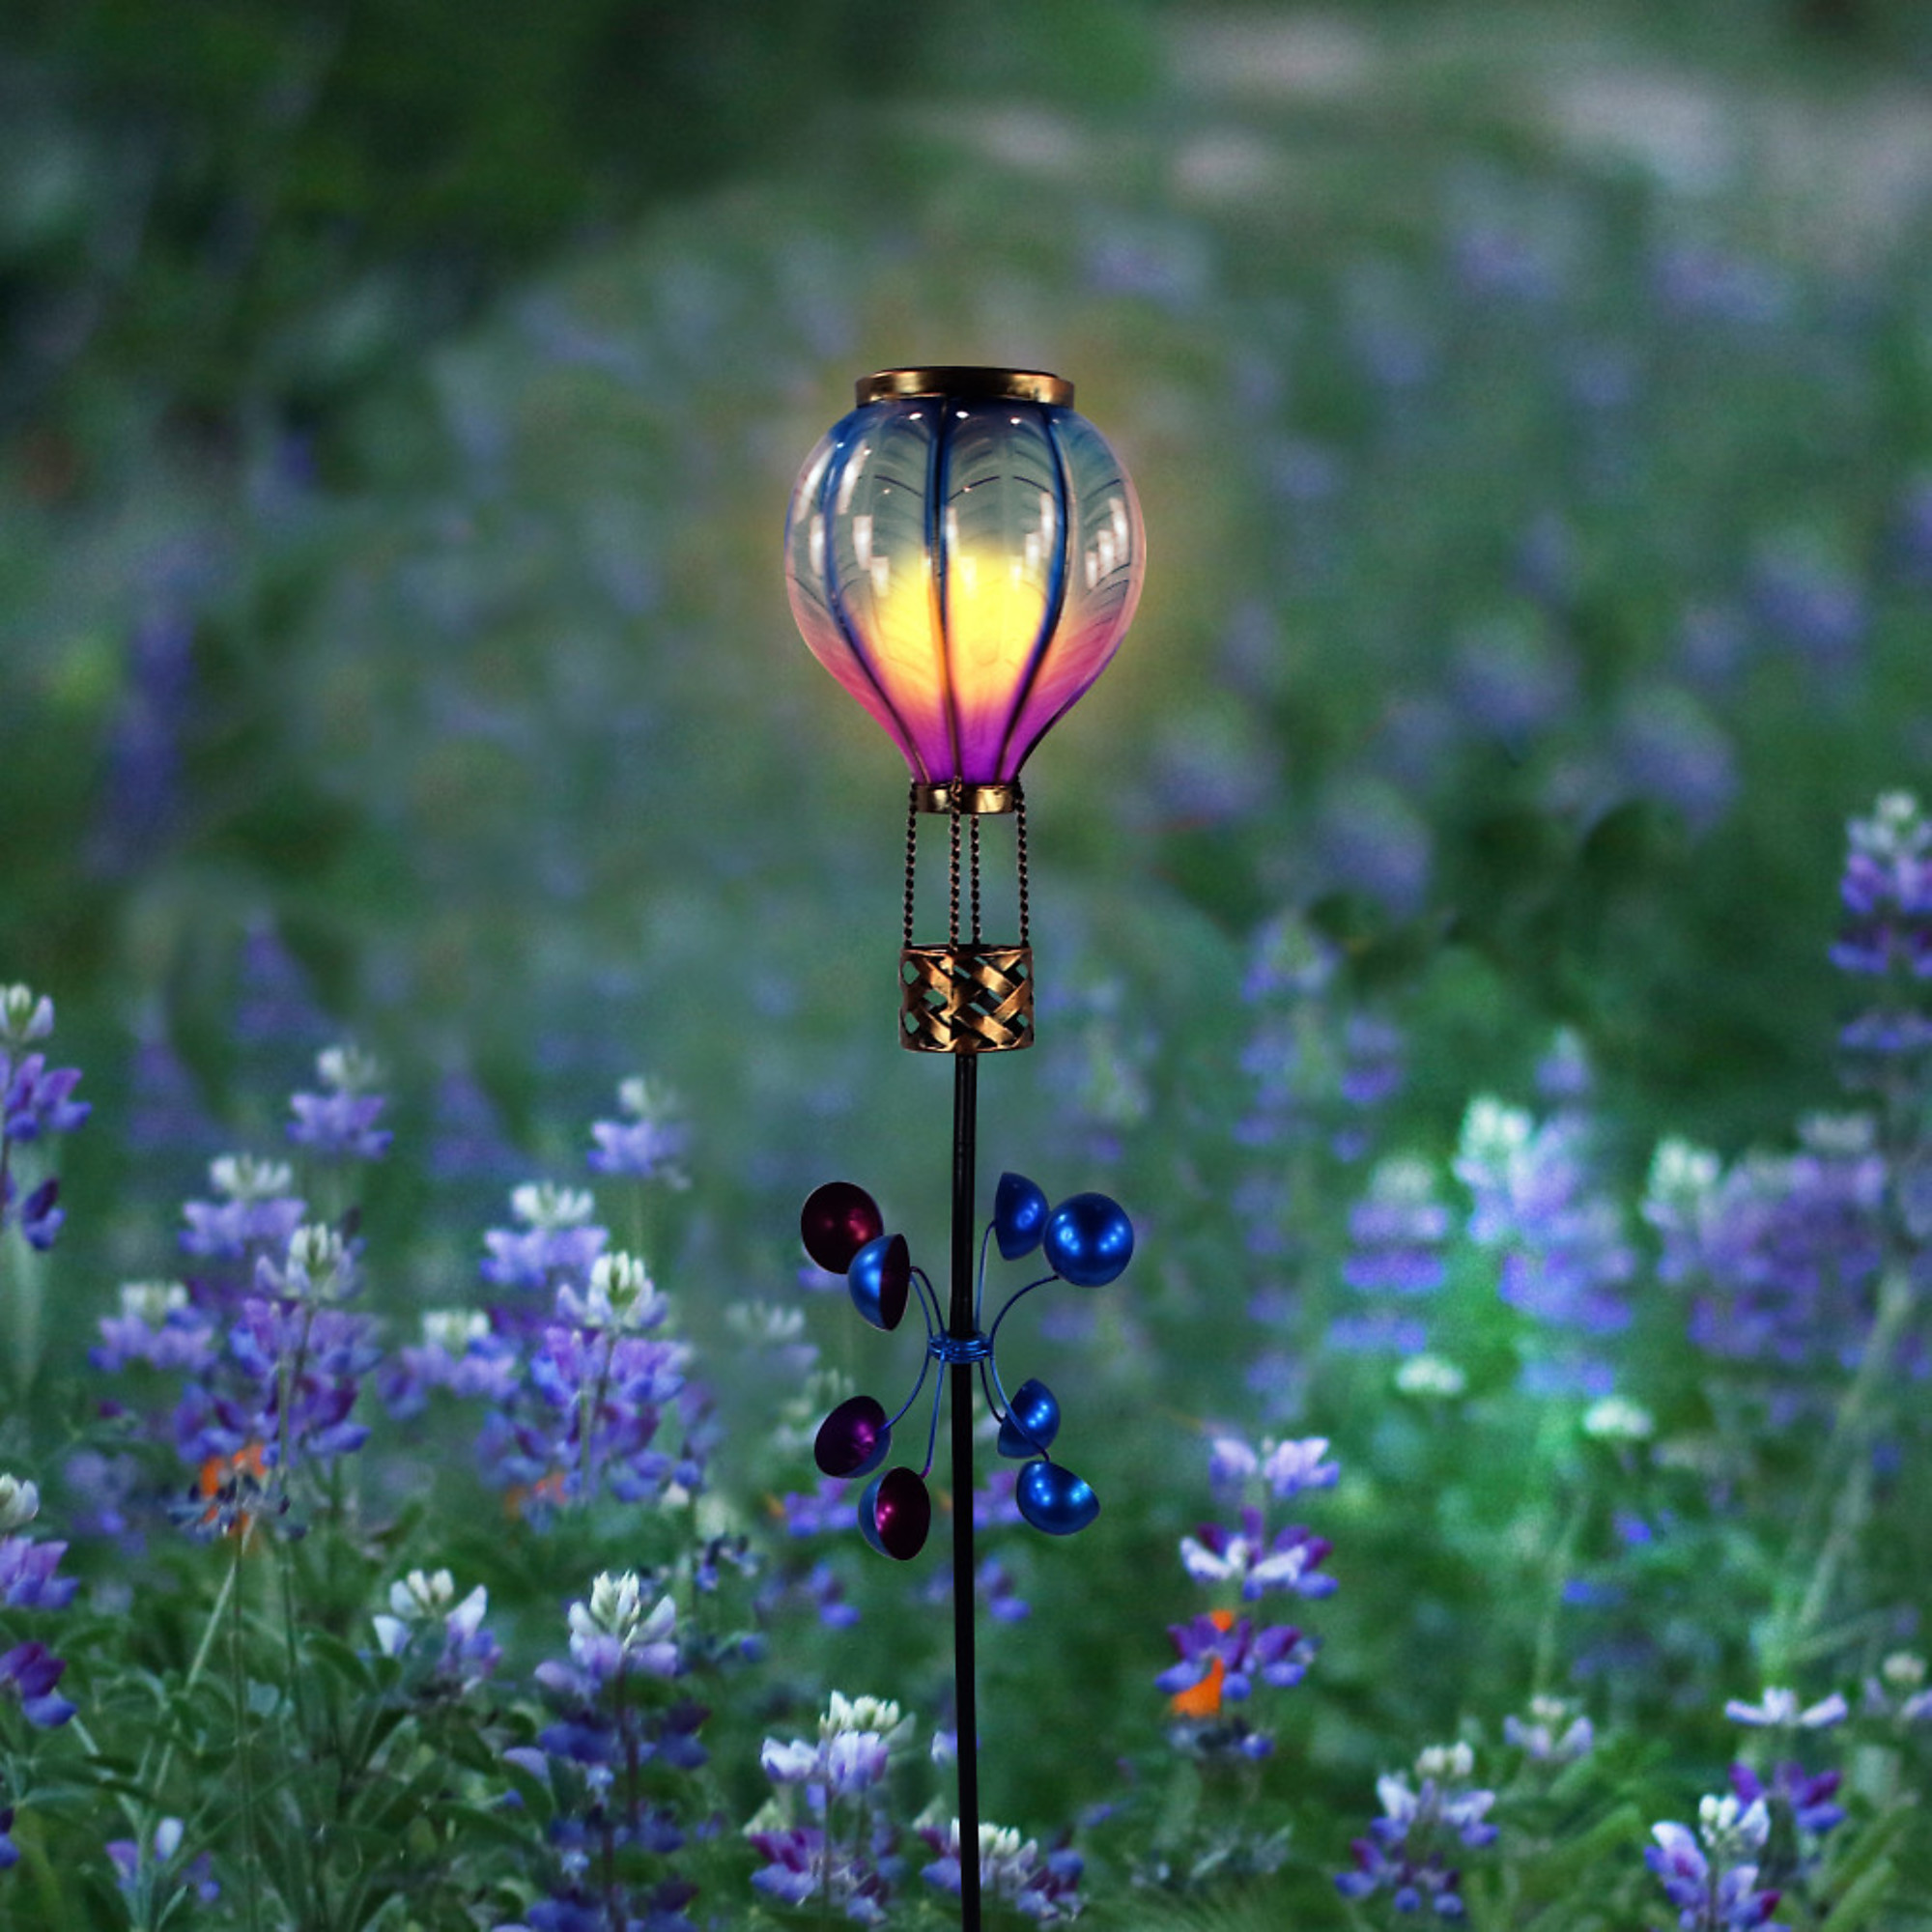 Alpine Corporation, Solar Hot Air Balloon Spinning Garden Stake w/LED, Color Multi, Watts 0 Included (qty.) 1 Model RGG1002SLR